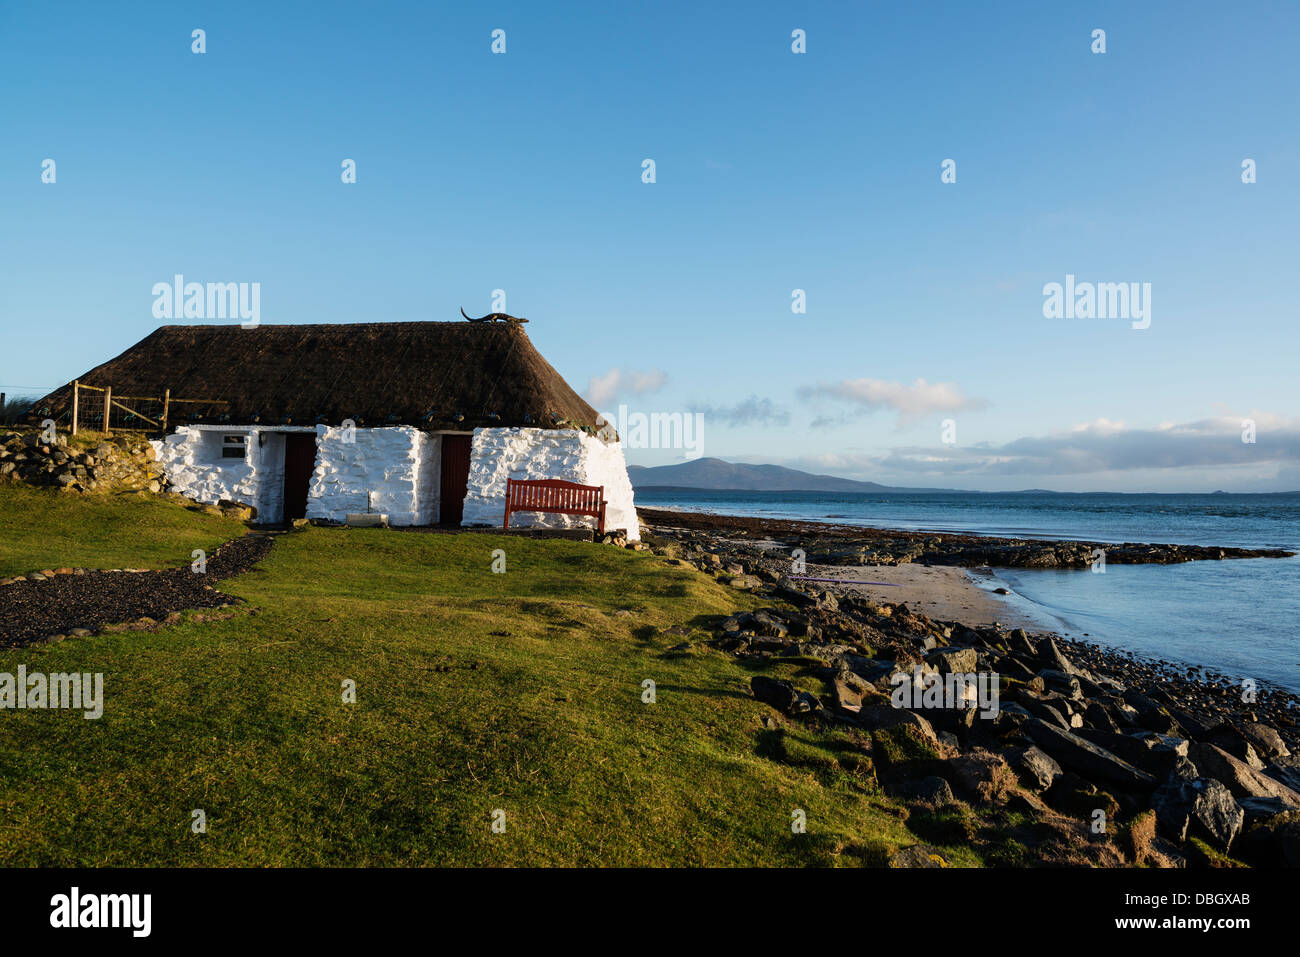 Thatched roof traditional blackhouse now used as youth hostel, Berneray, Outer Hebrides, Scotland Stock Photo